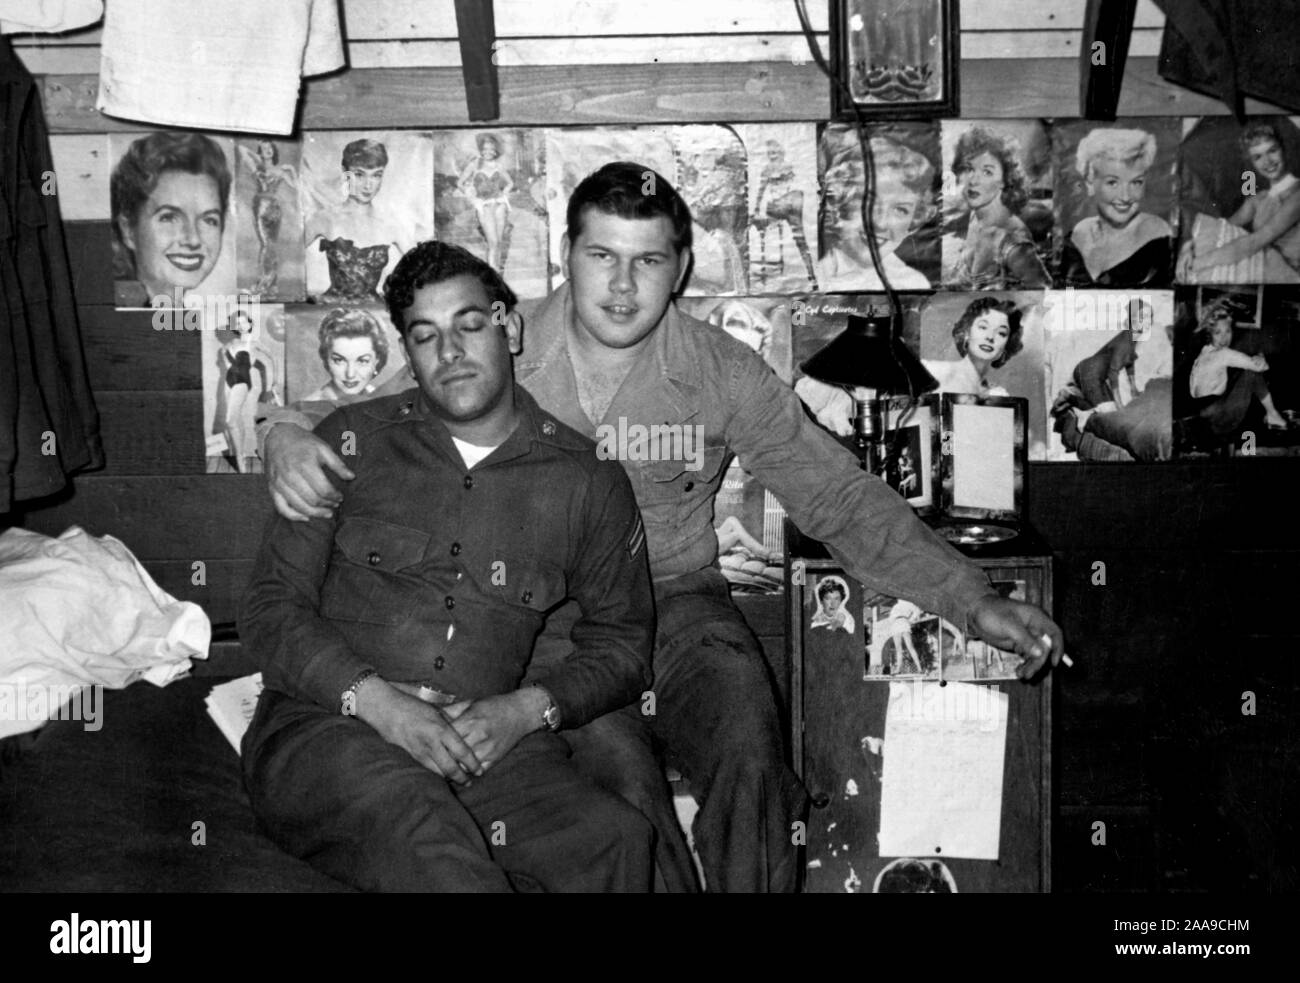 US soldiers in front of some pinup girl photos in their barracks during the Korean War, ca. 1953. Stock Photo